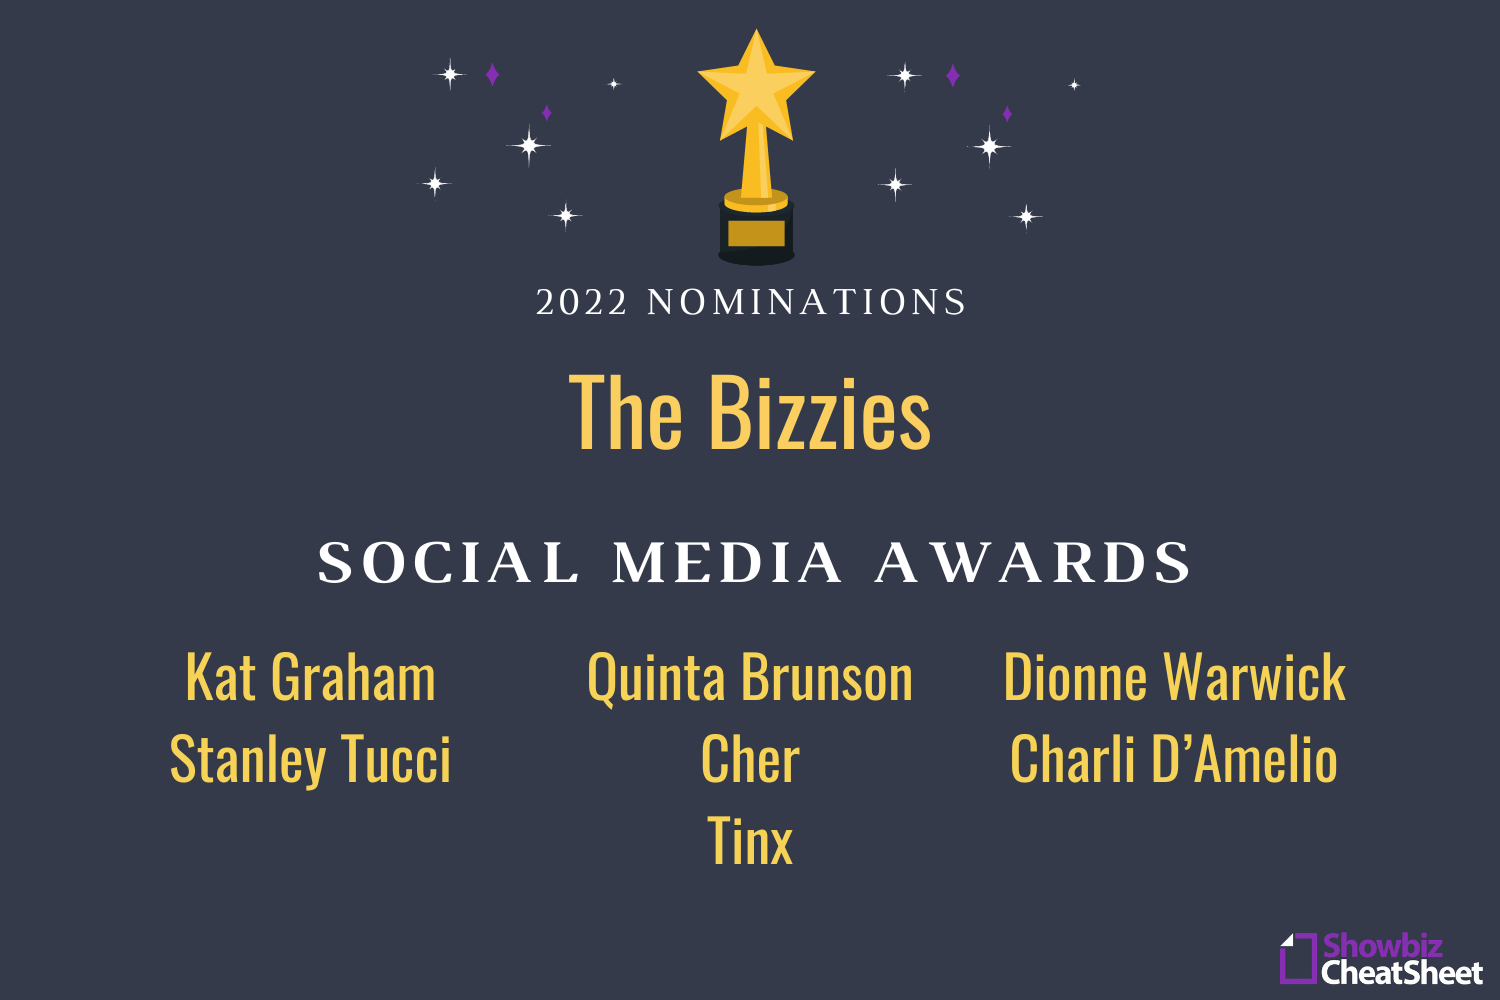 The nominees for The Bizzies 2022 Social Media Awards